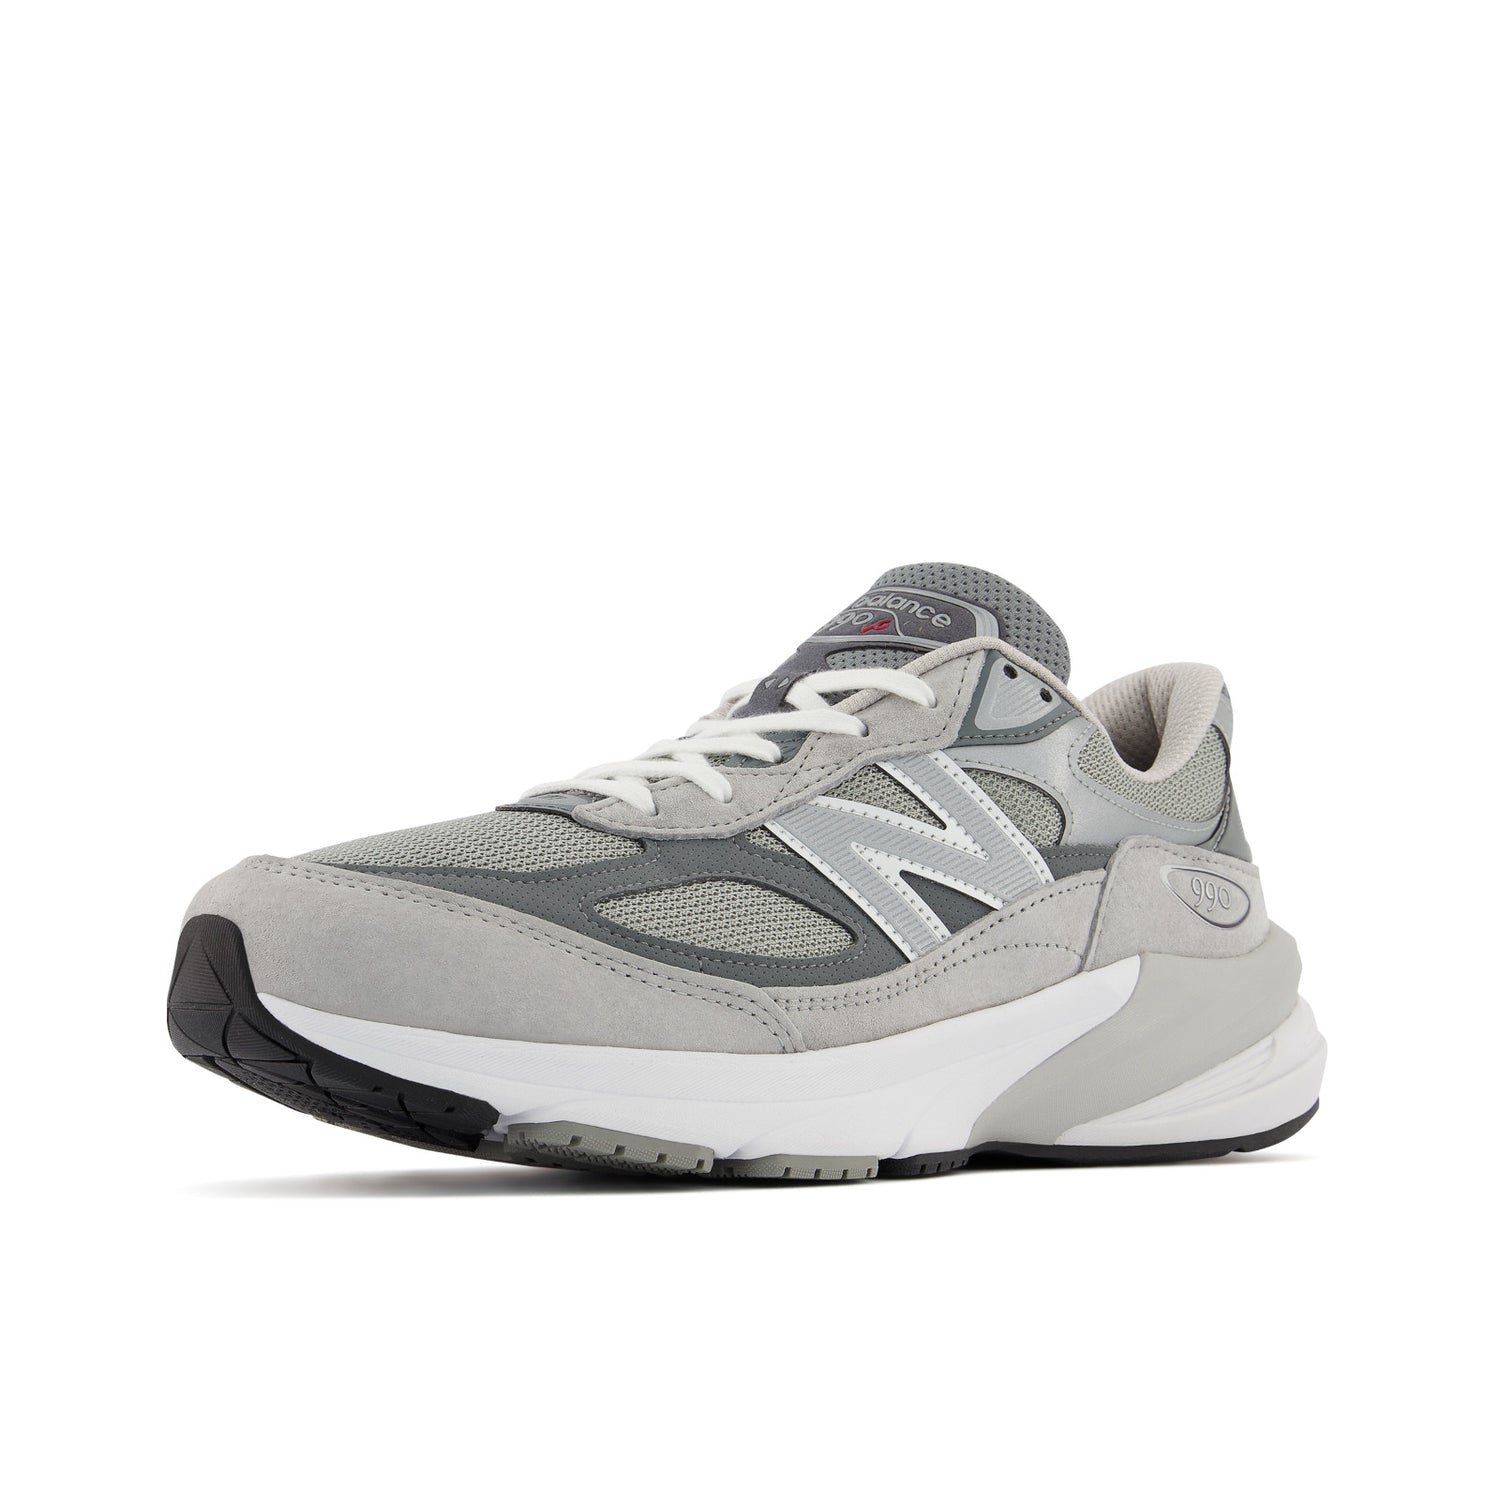 990V6 MADE IN USA COOL GREY